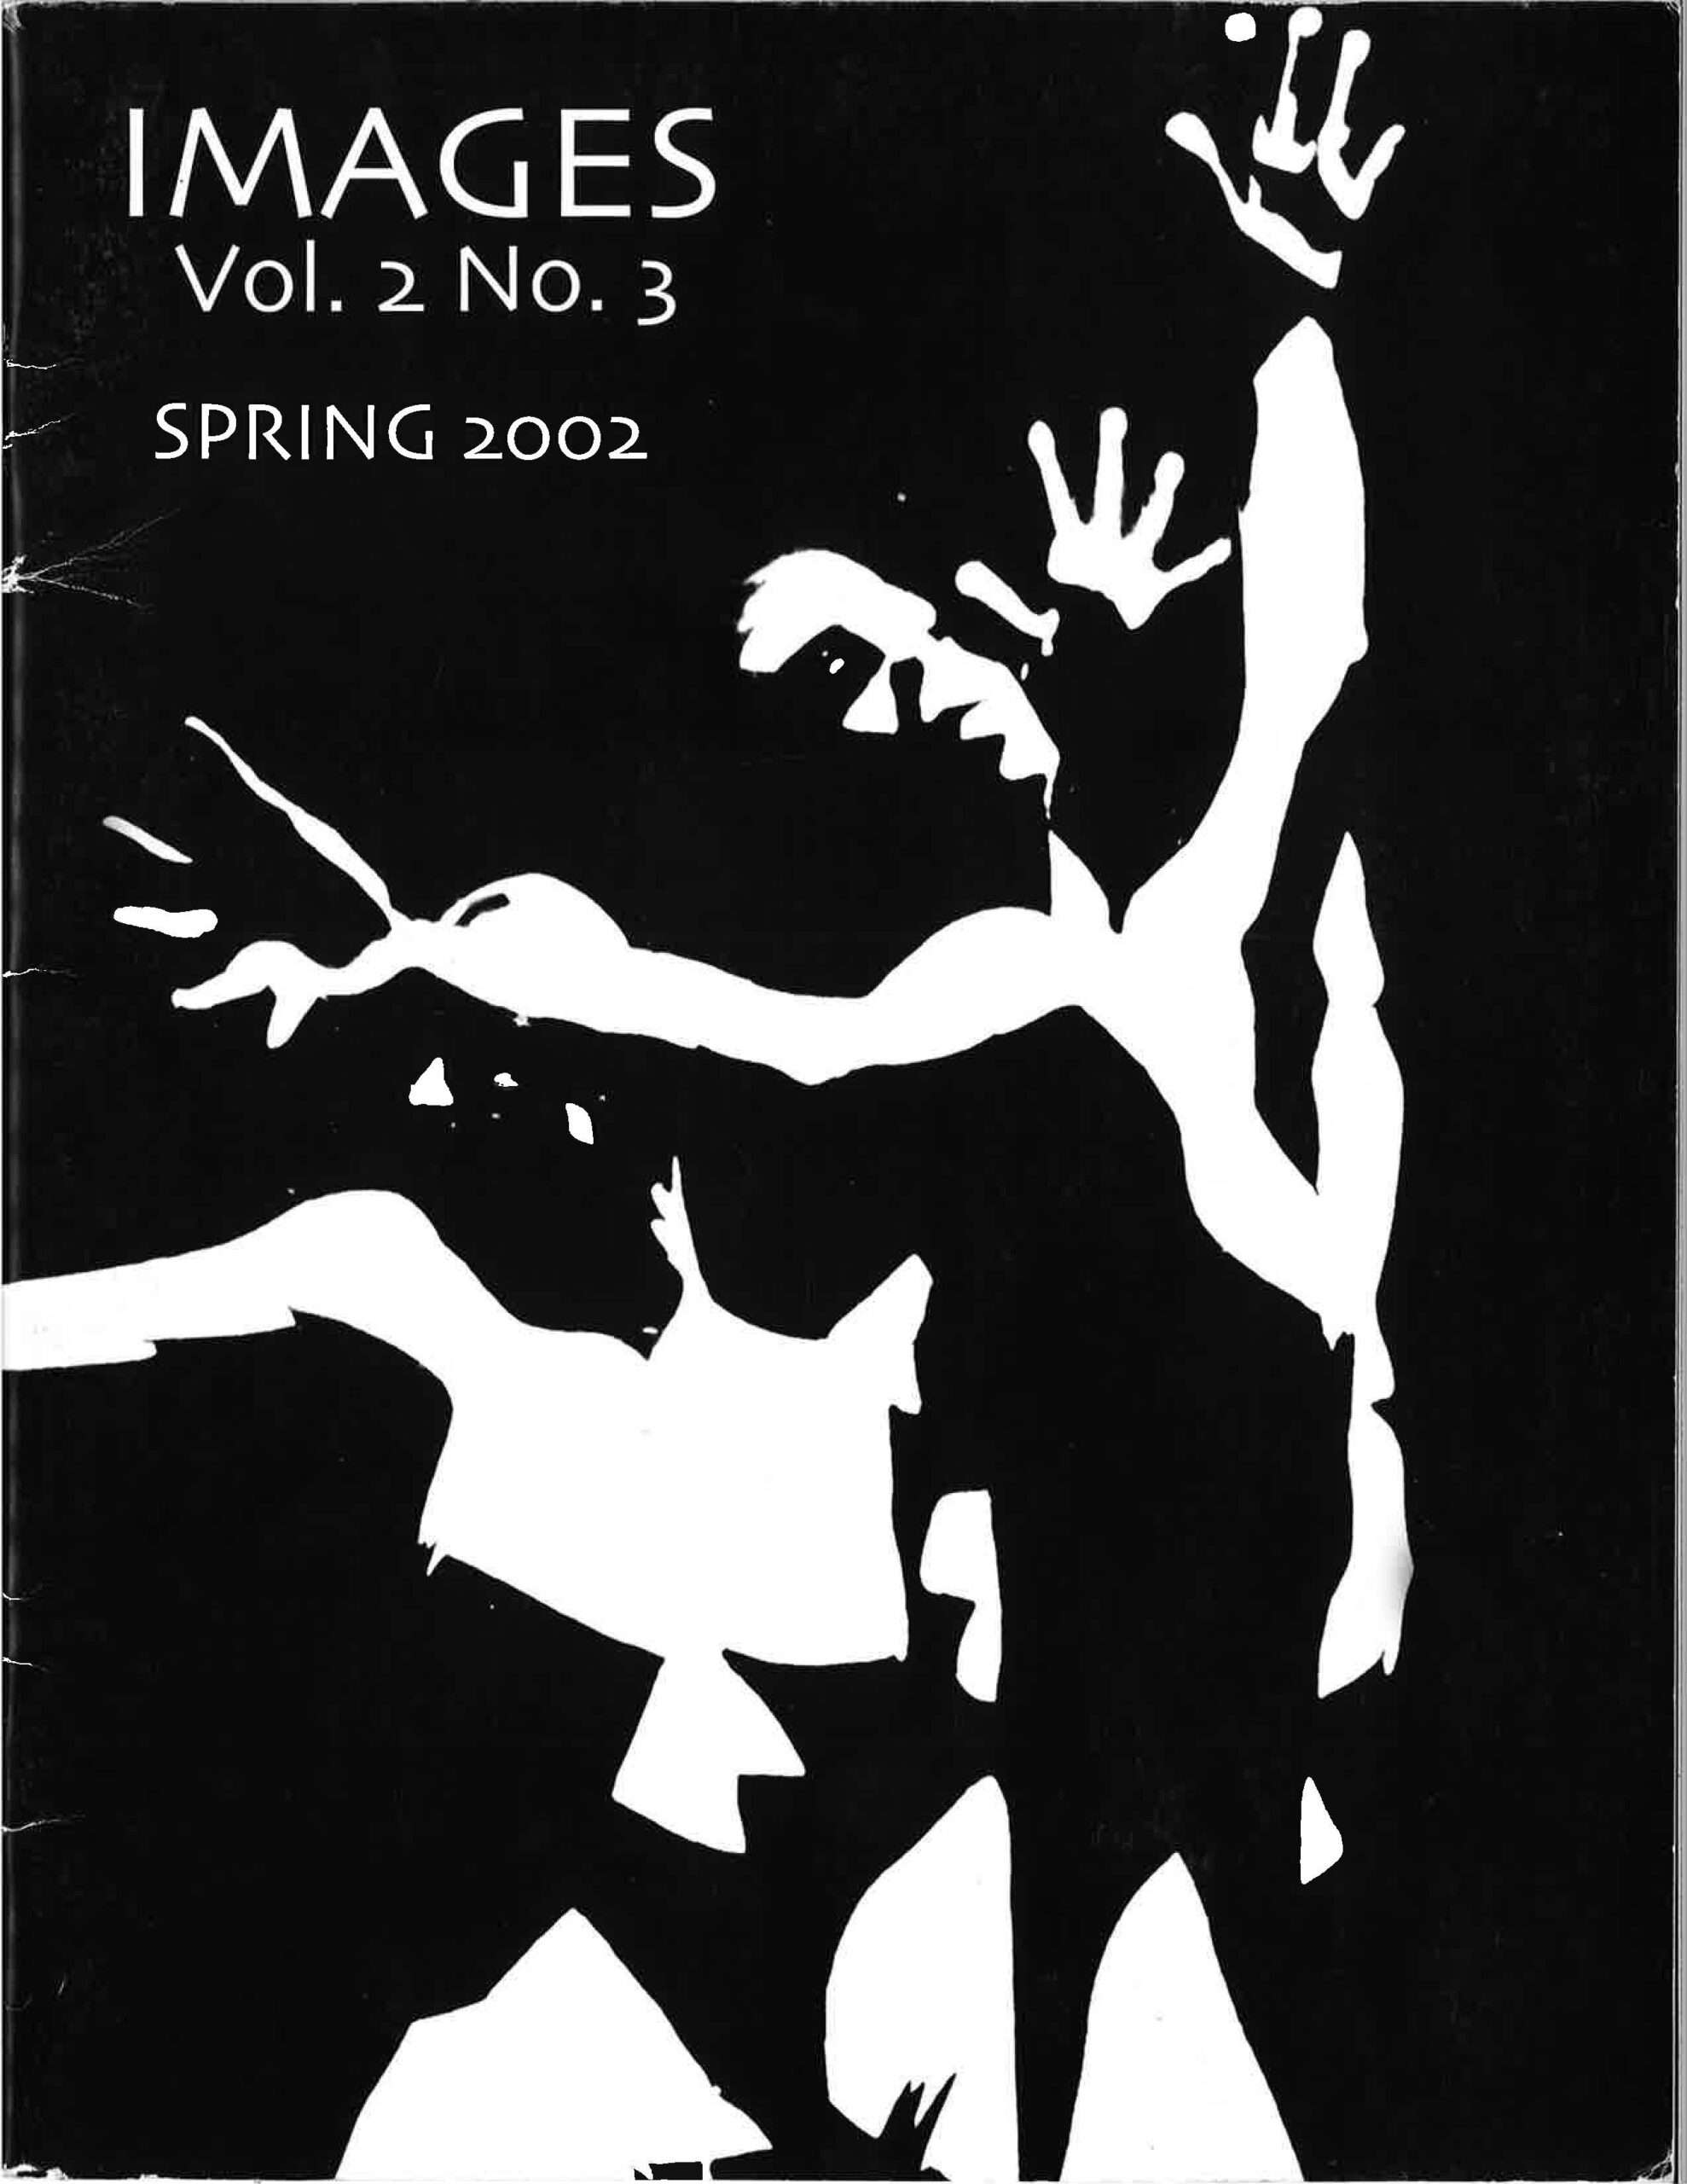 IMAGES 2002 cover with a black background, text in white and two people in the center with their arms up in the air.